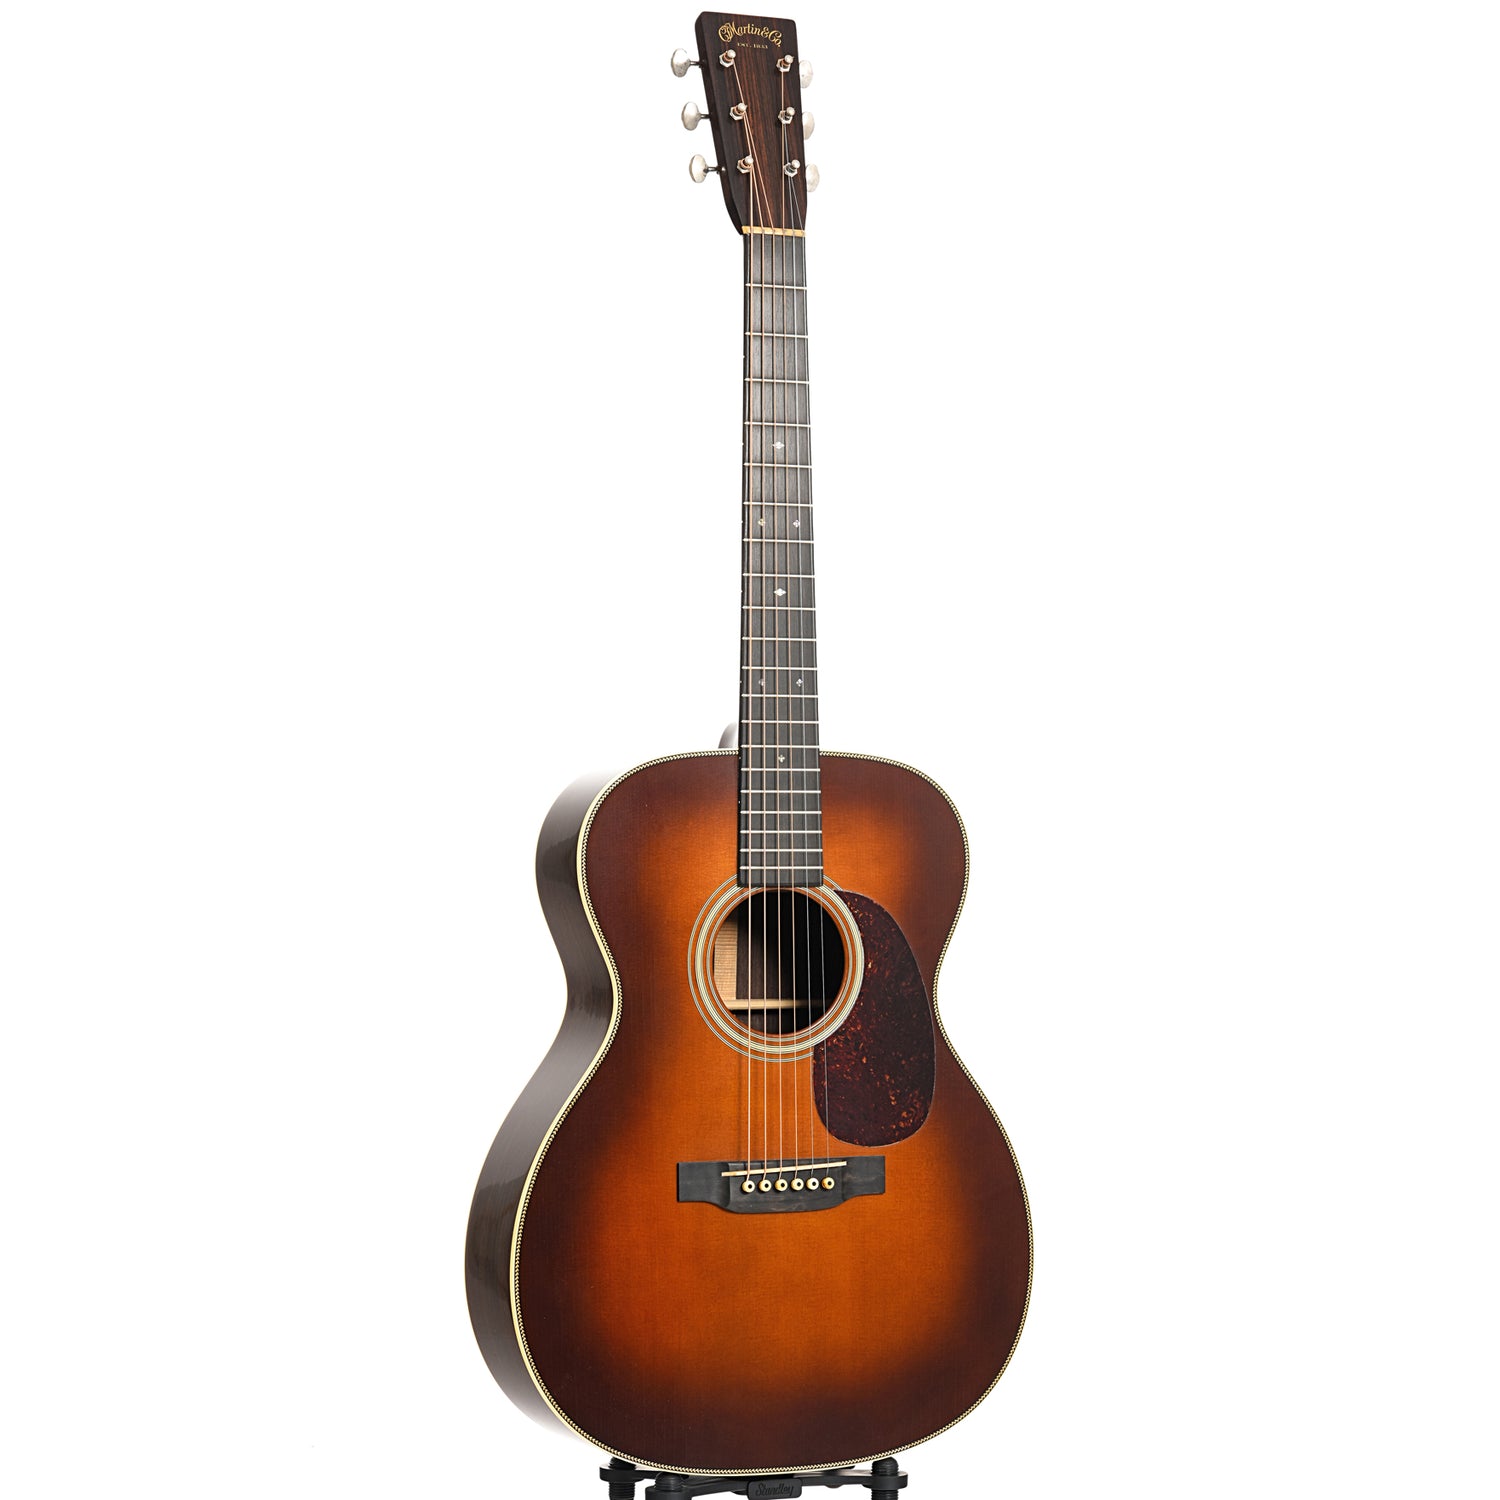 Image 11 of Martin Custom 000-28 Authentic 1937 Guitar & Case, Aged Ambertone - SKU# 00028AUTH37CE-AGED-AMB : Product Type Flat-top Guitars : Elderly Instruments